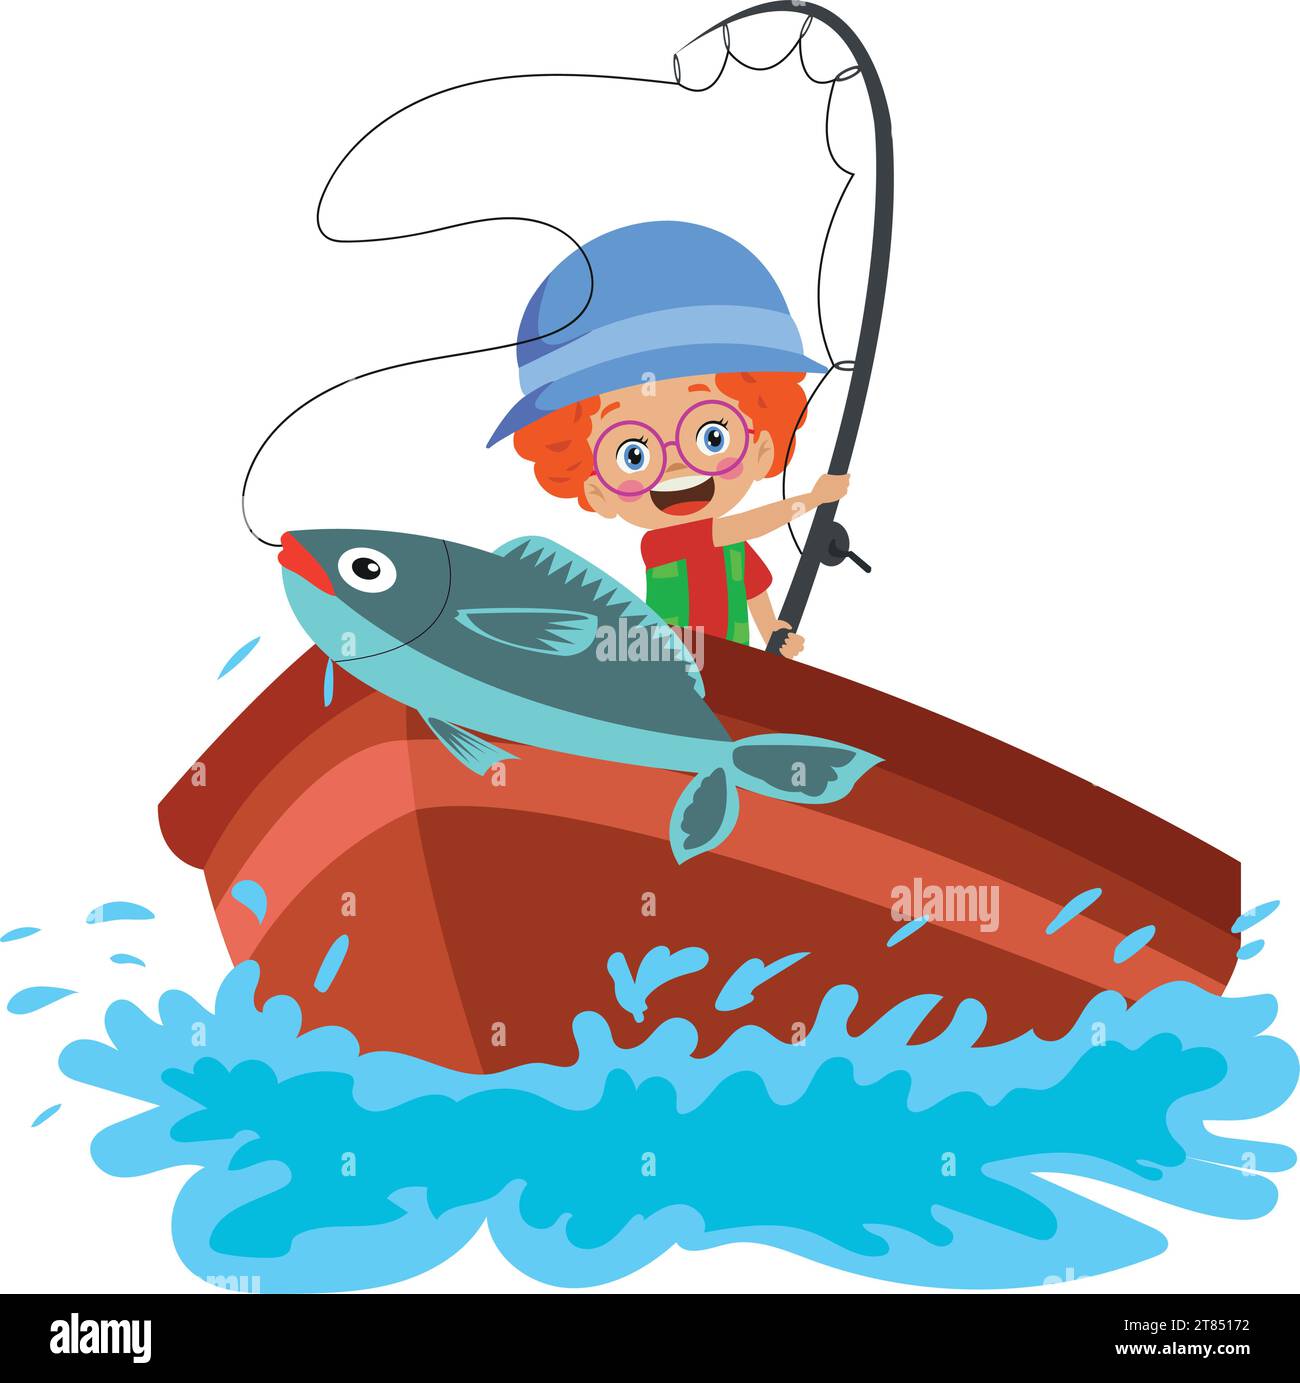 Illustration of Stickman Kids Holding Fishing Rods by the Lake Looking Up  Stock Photo - Alamy